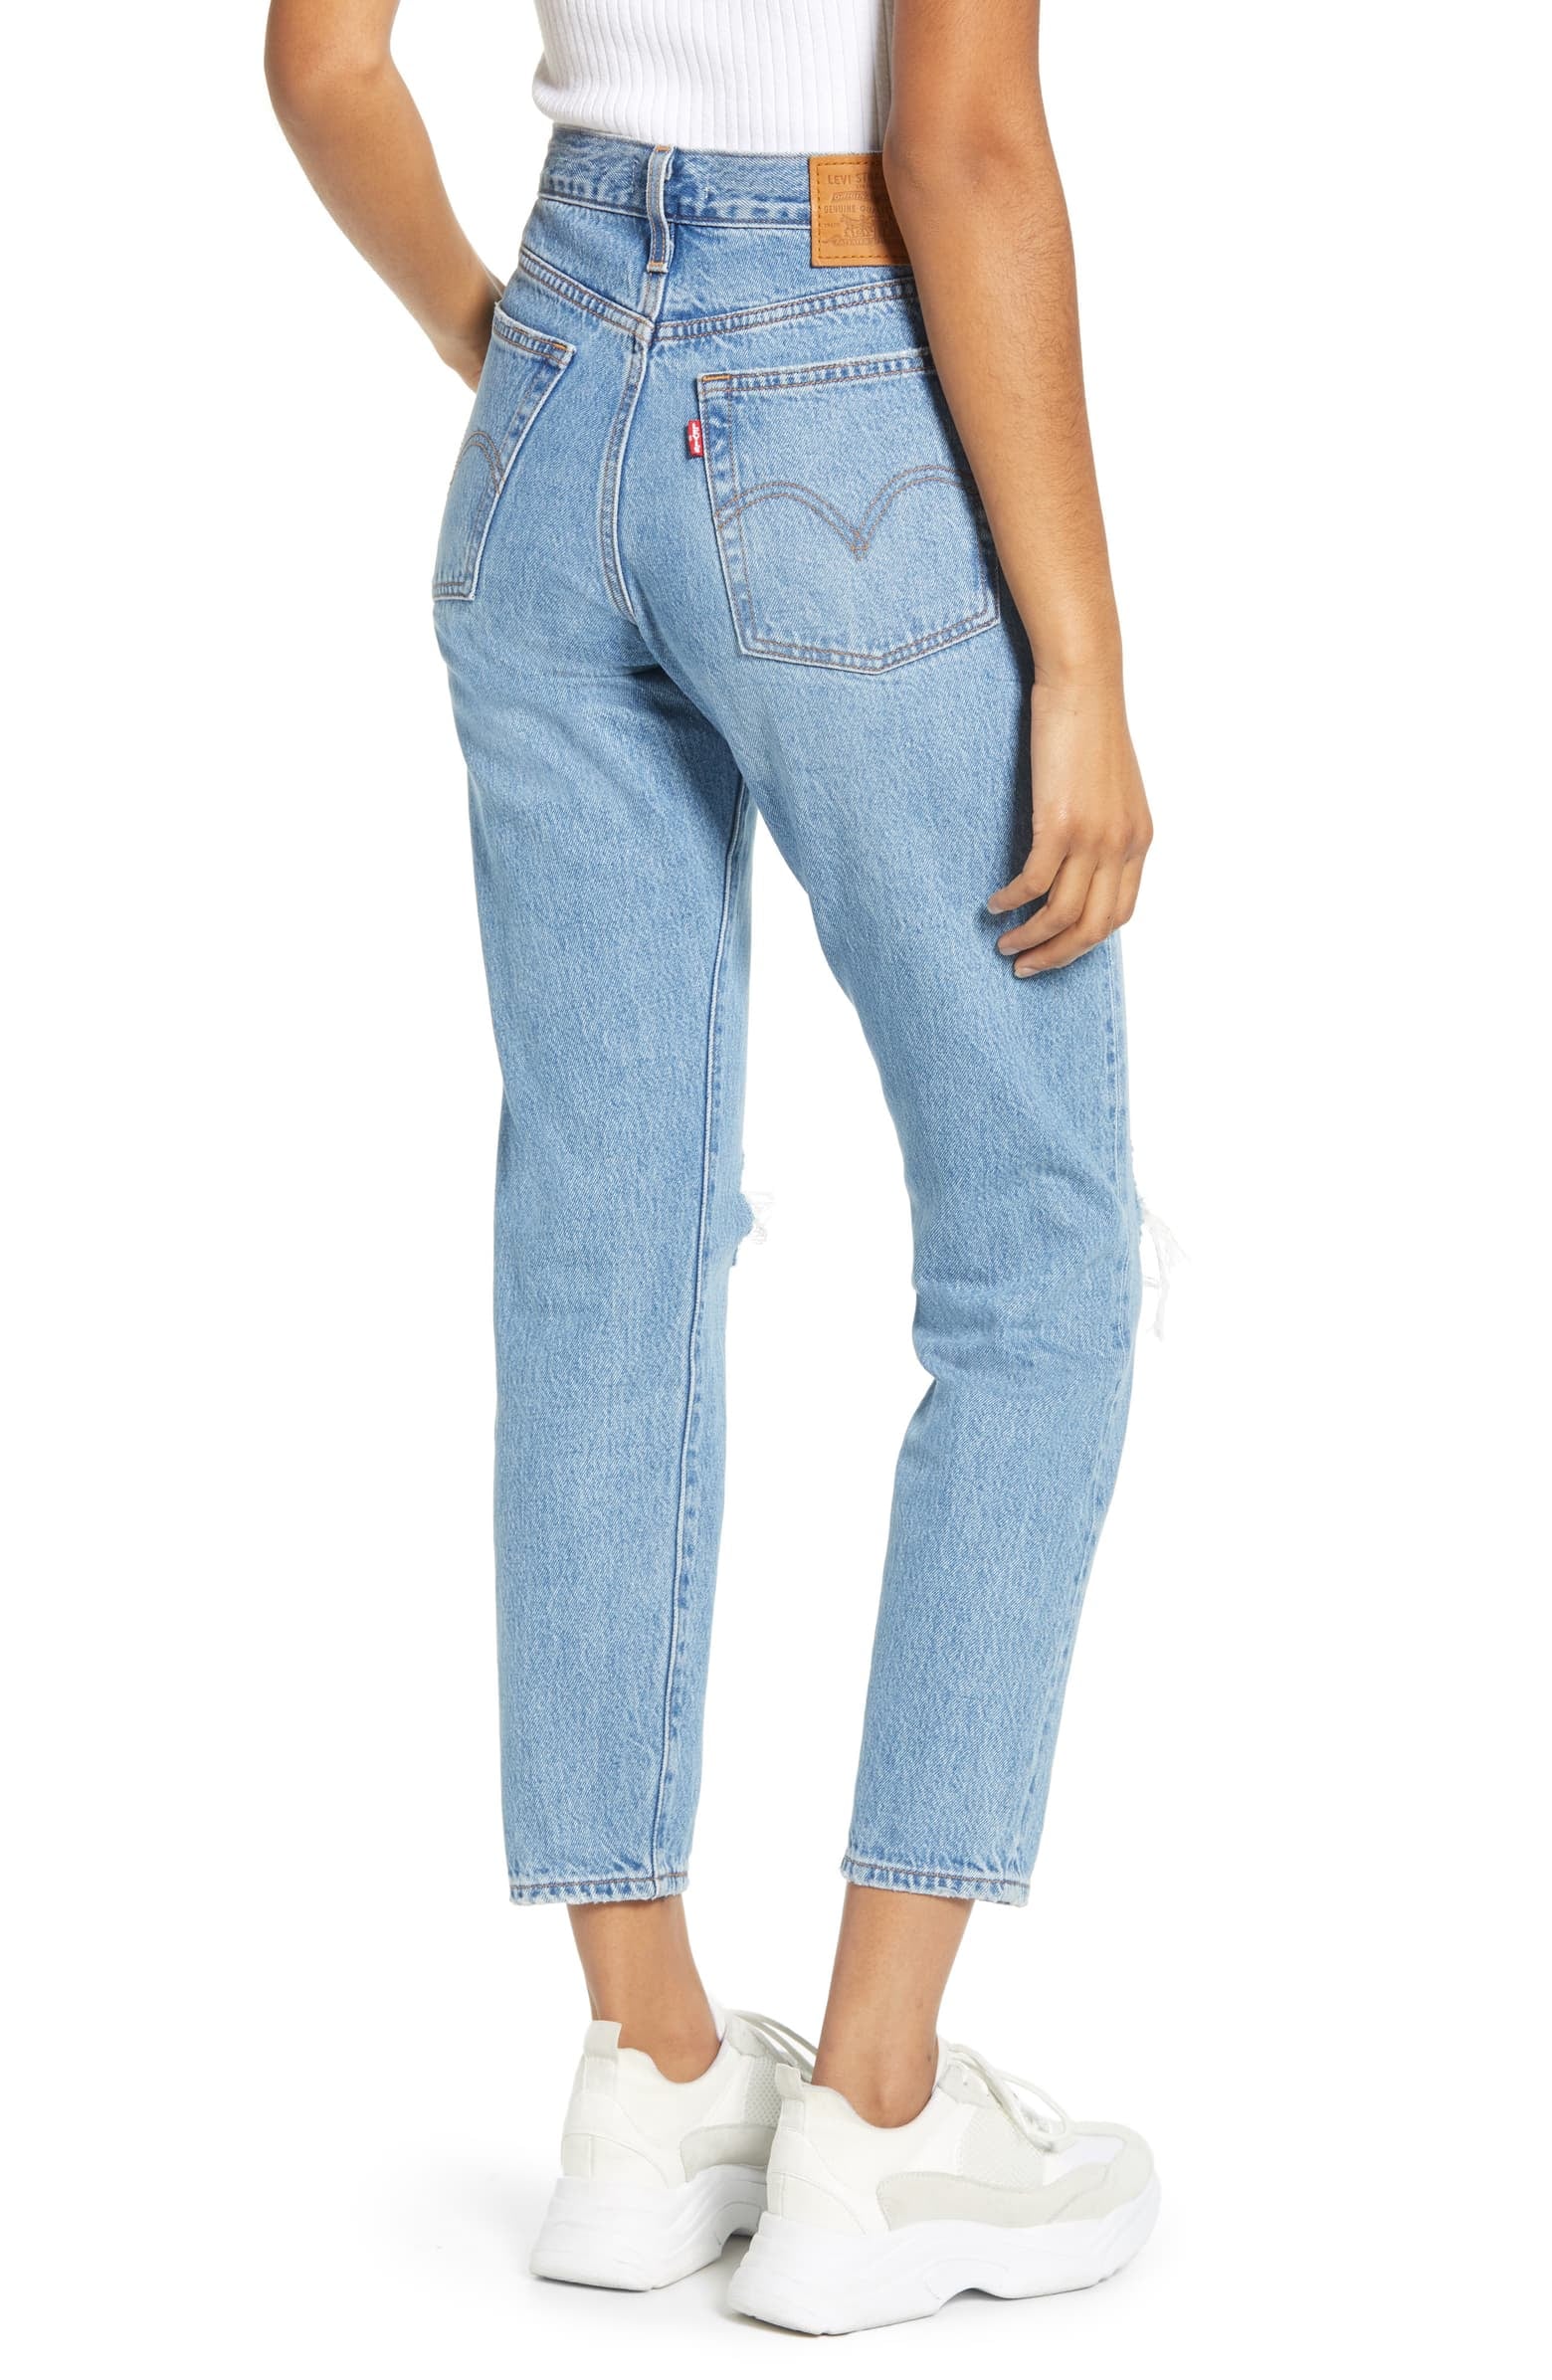 Levi's Wedgie Icon Fit Ripped Straight Leg Jeans | Don't Pack For Your Next  Trip Without These 24 Comfy Travel Essentials | POPSUGAR Travel Photo 19